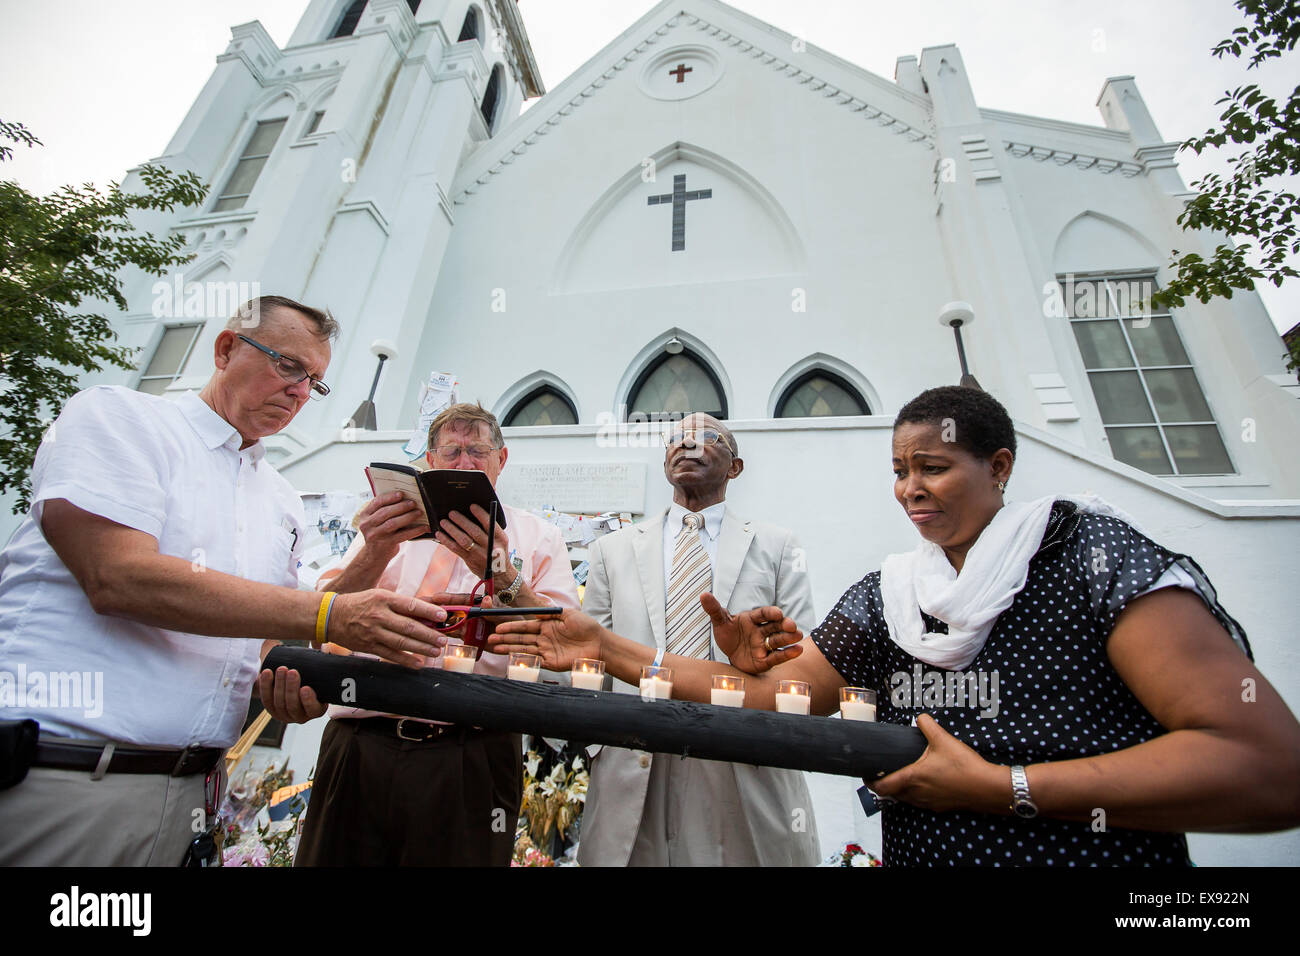 Memorial service in front of Emanuel AME Church in Charleston, S.C. after the shooting that took nine lives. Stock Photo